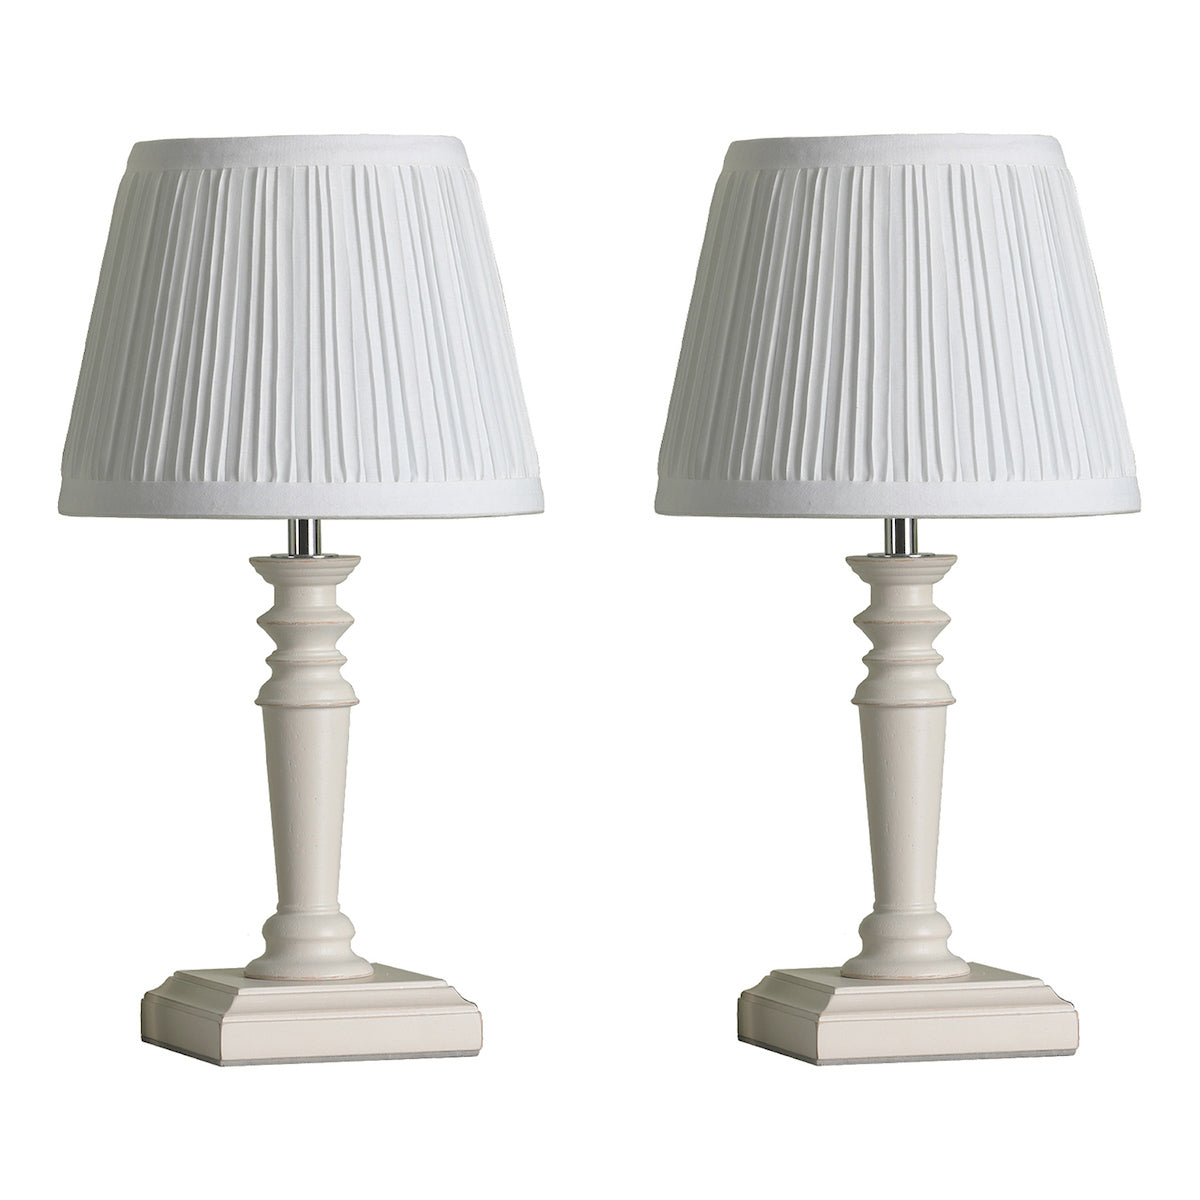 Laura Ashley Tate Wood 2 Pack Table Lamp with Shade